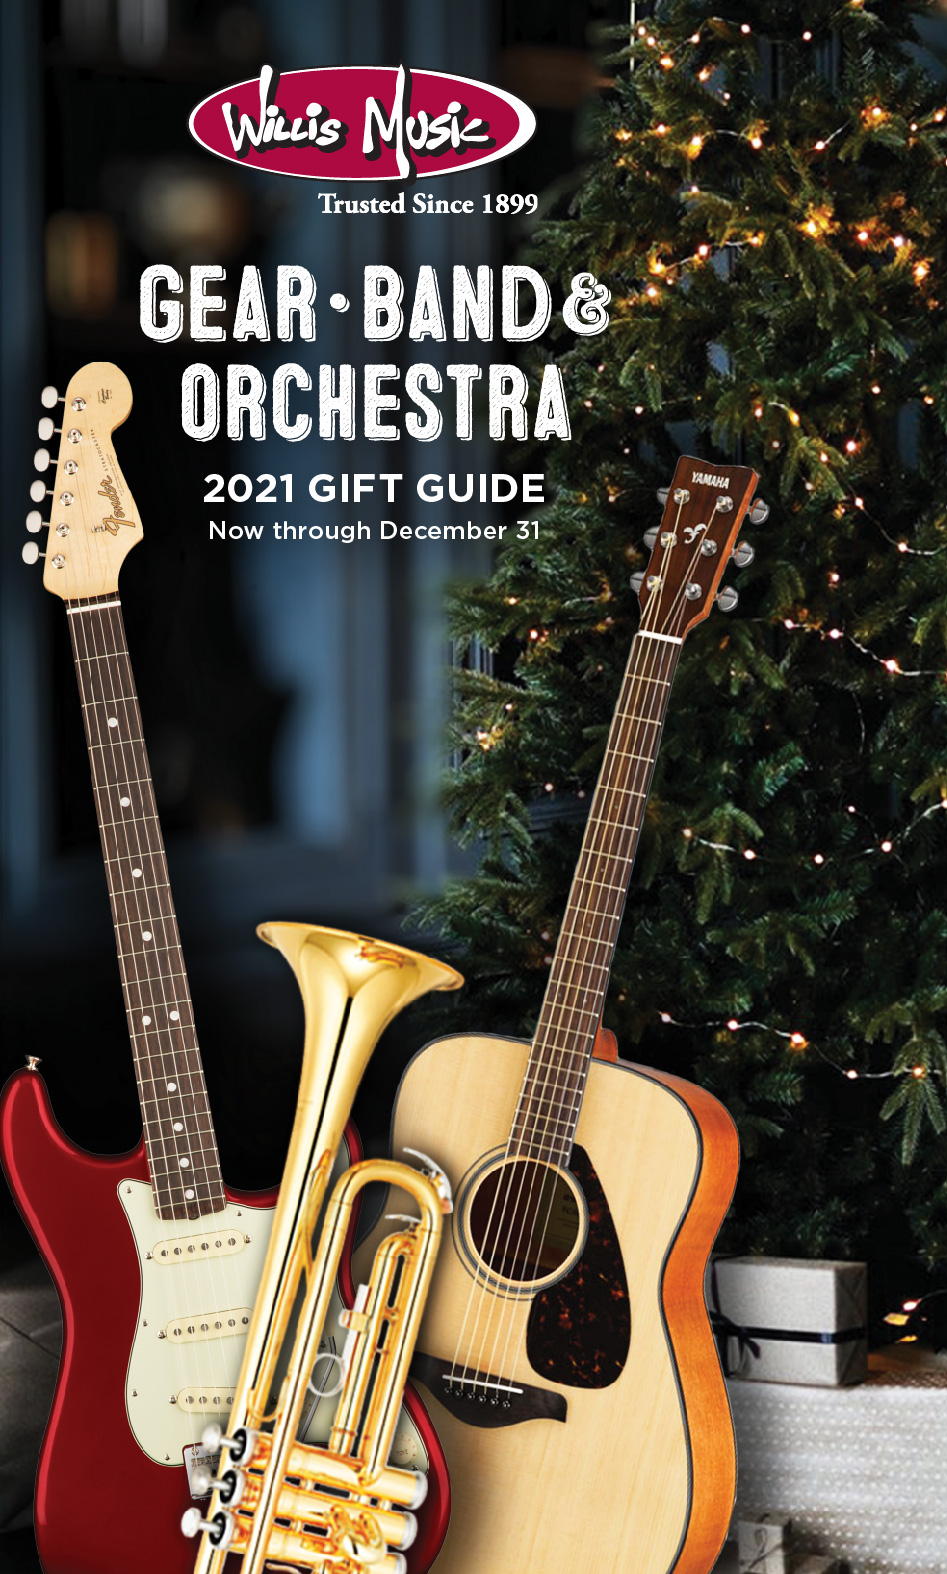 2021 Gift Guide Cover Image